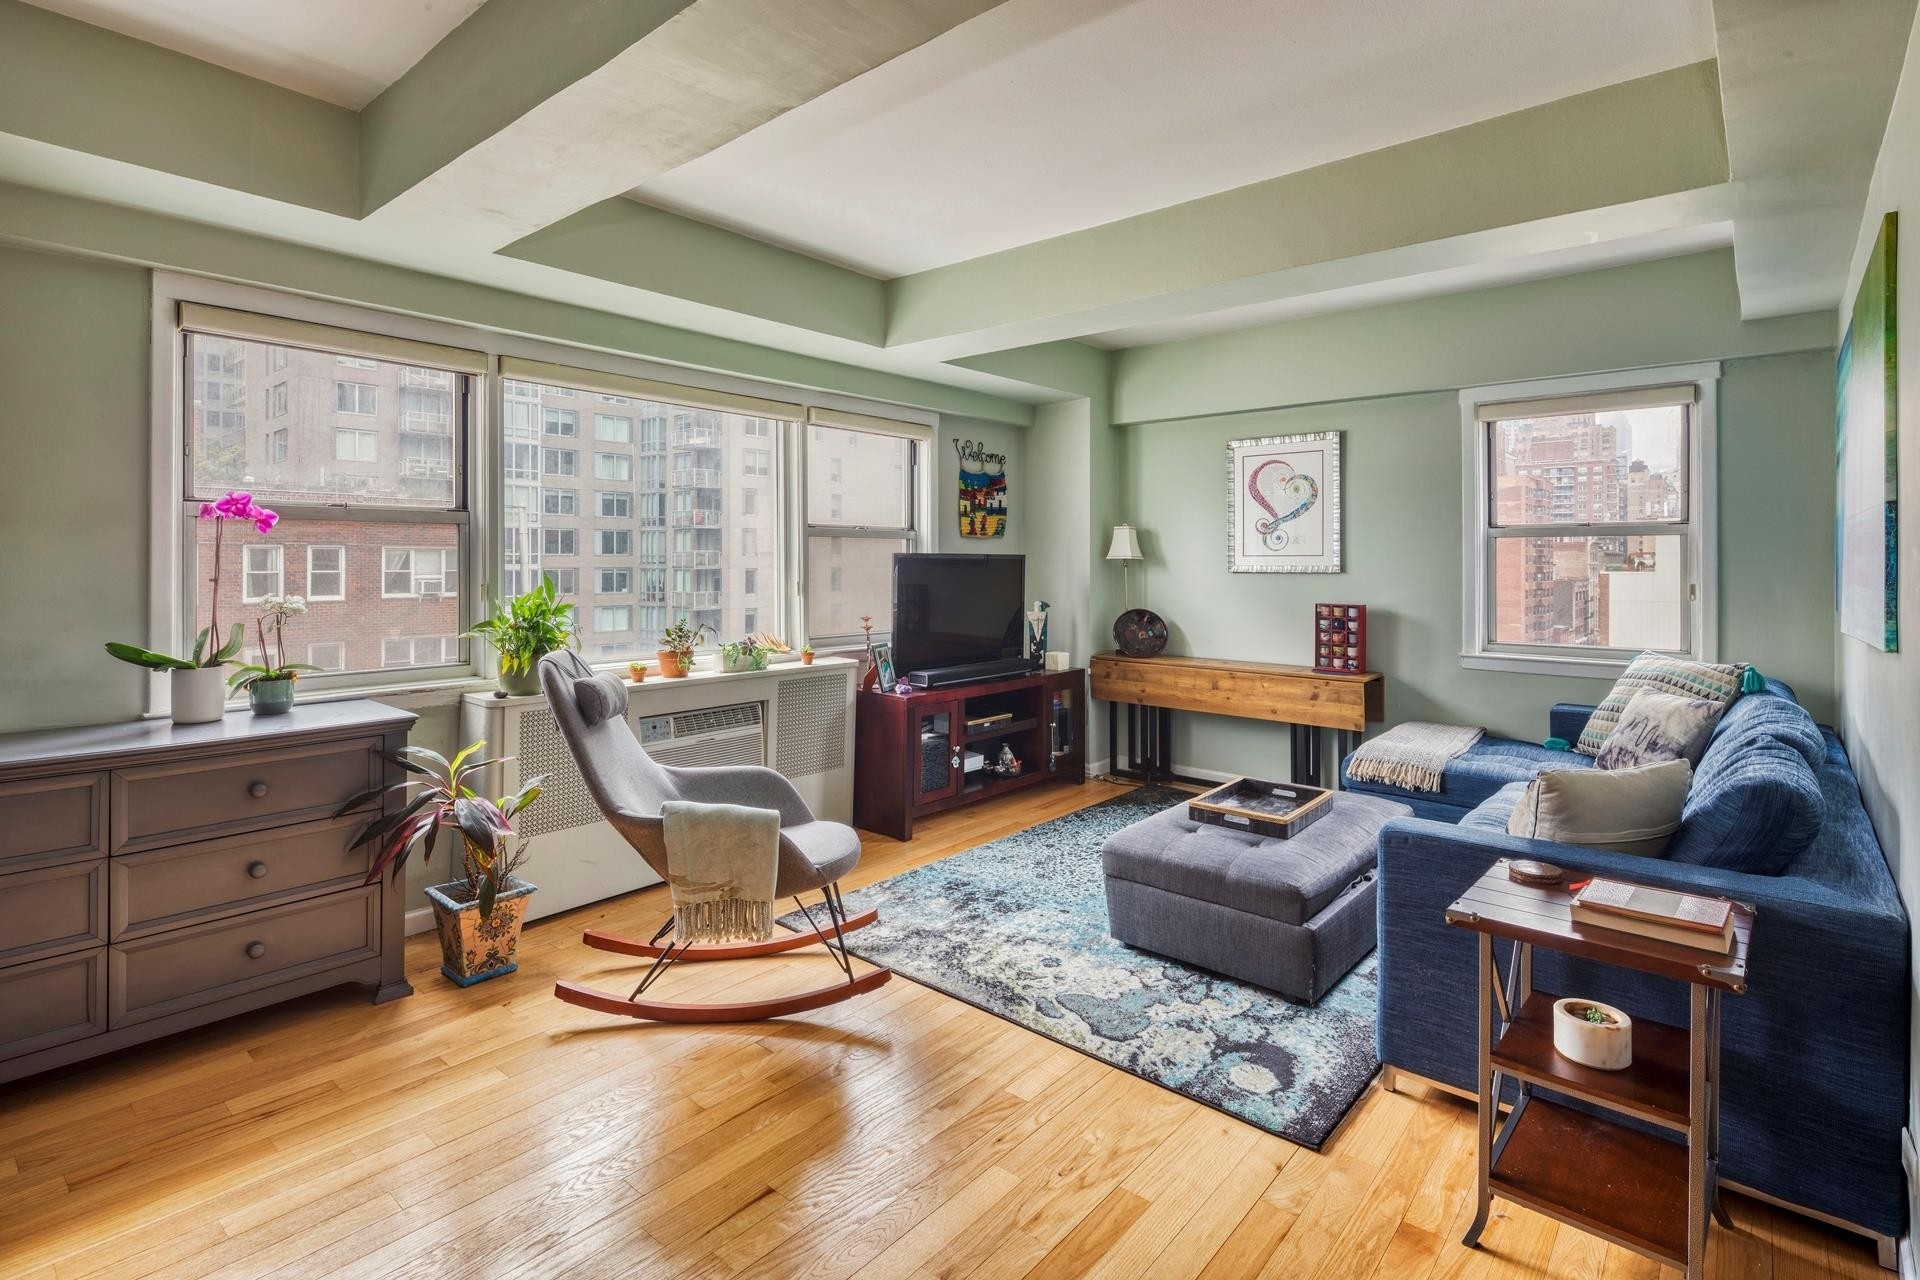 Co-op Properties for Sale at The Townsley, 245 E 35TH ST, 14B Murray Hill, New York, NY 10016